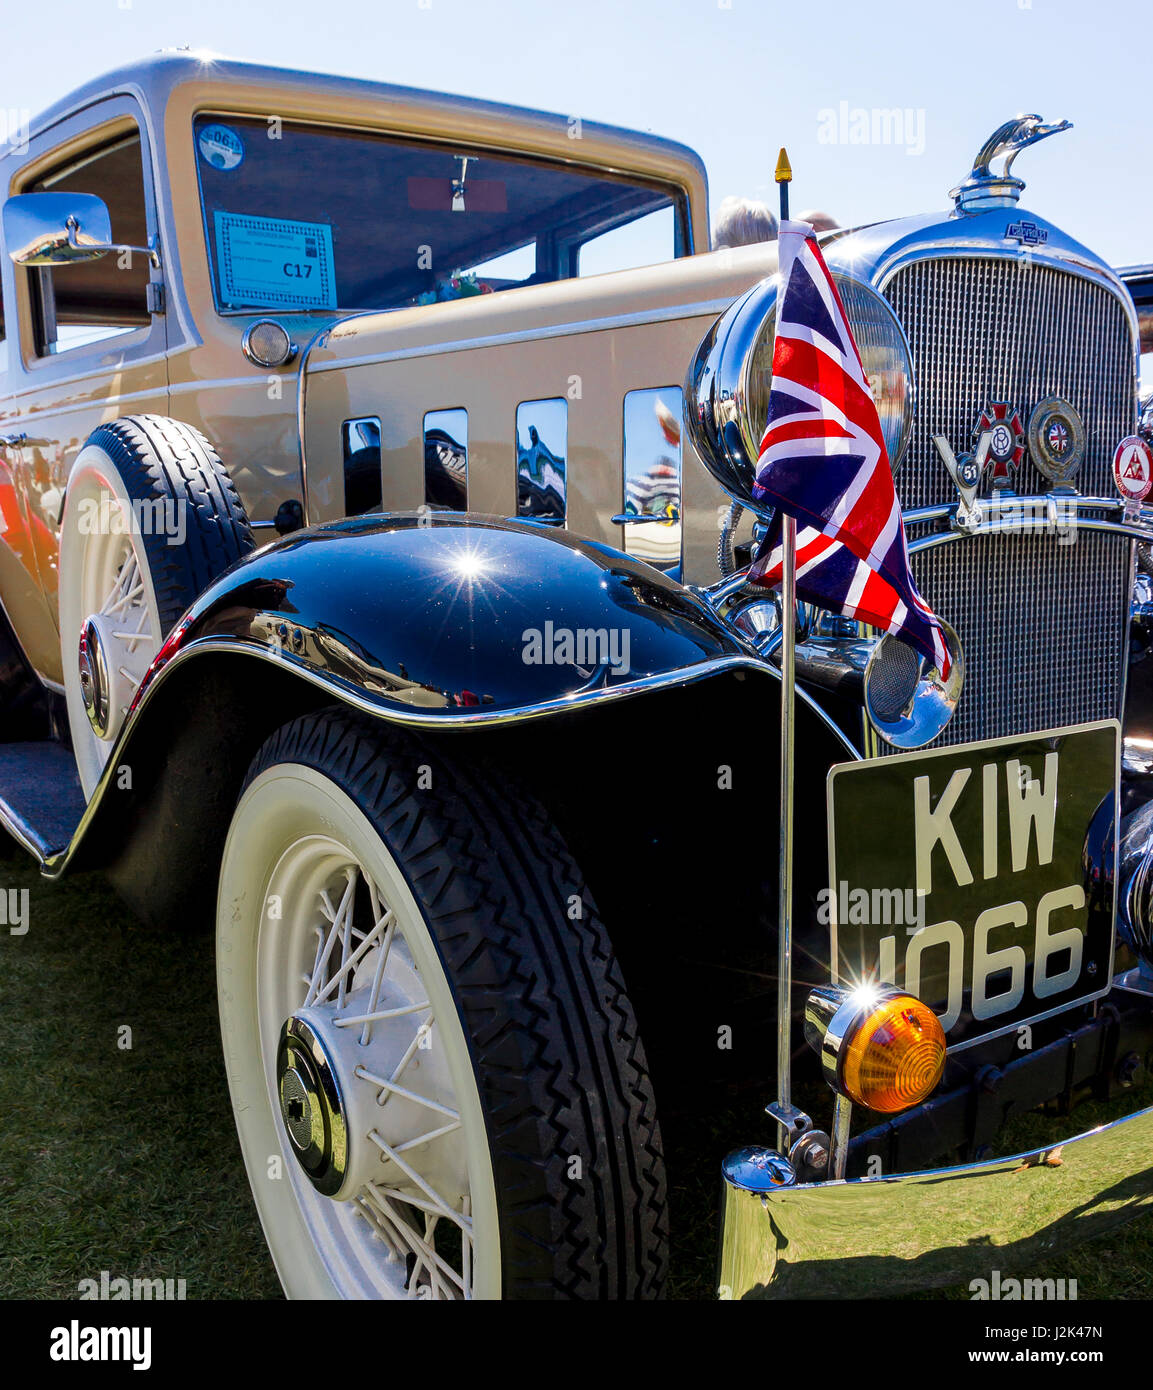 Eastbourne, Sussex, United Kingdom. 29th April, 2017. Car club members from 40 organisations display nearly 600 vintage and classic vehicles at the Eastbourne Magnificent Motors Event Credit: Alan Fraser/Alamy Live News Stock Photo